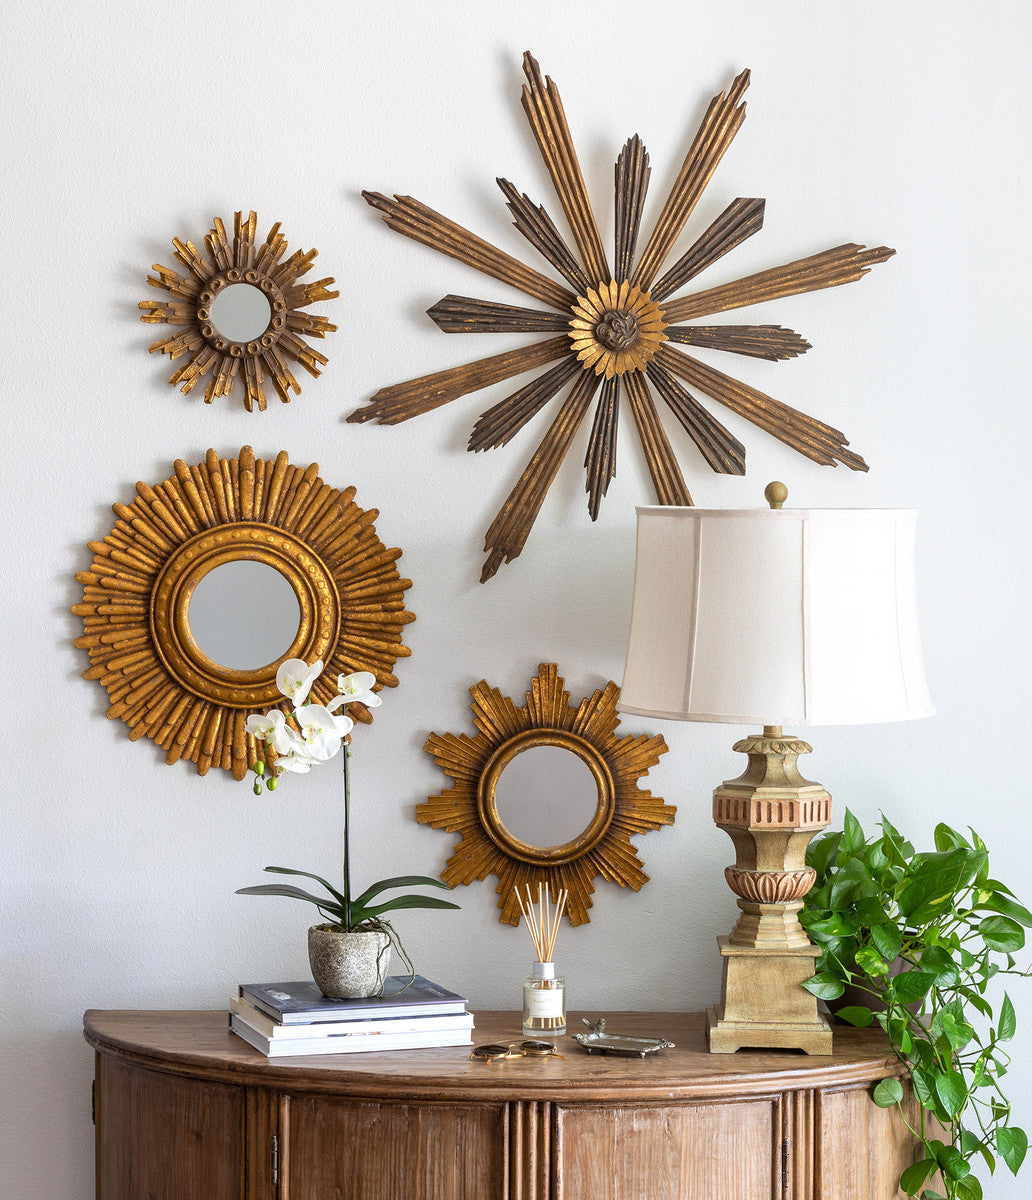 Marseille Sunburst Mirror from Southern Classic Collection